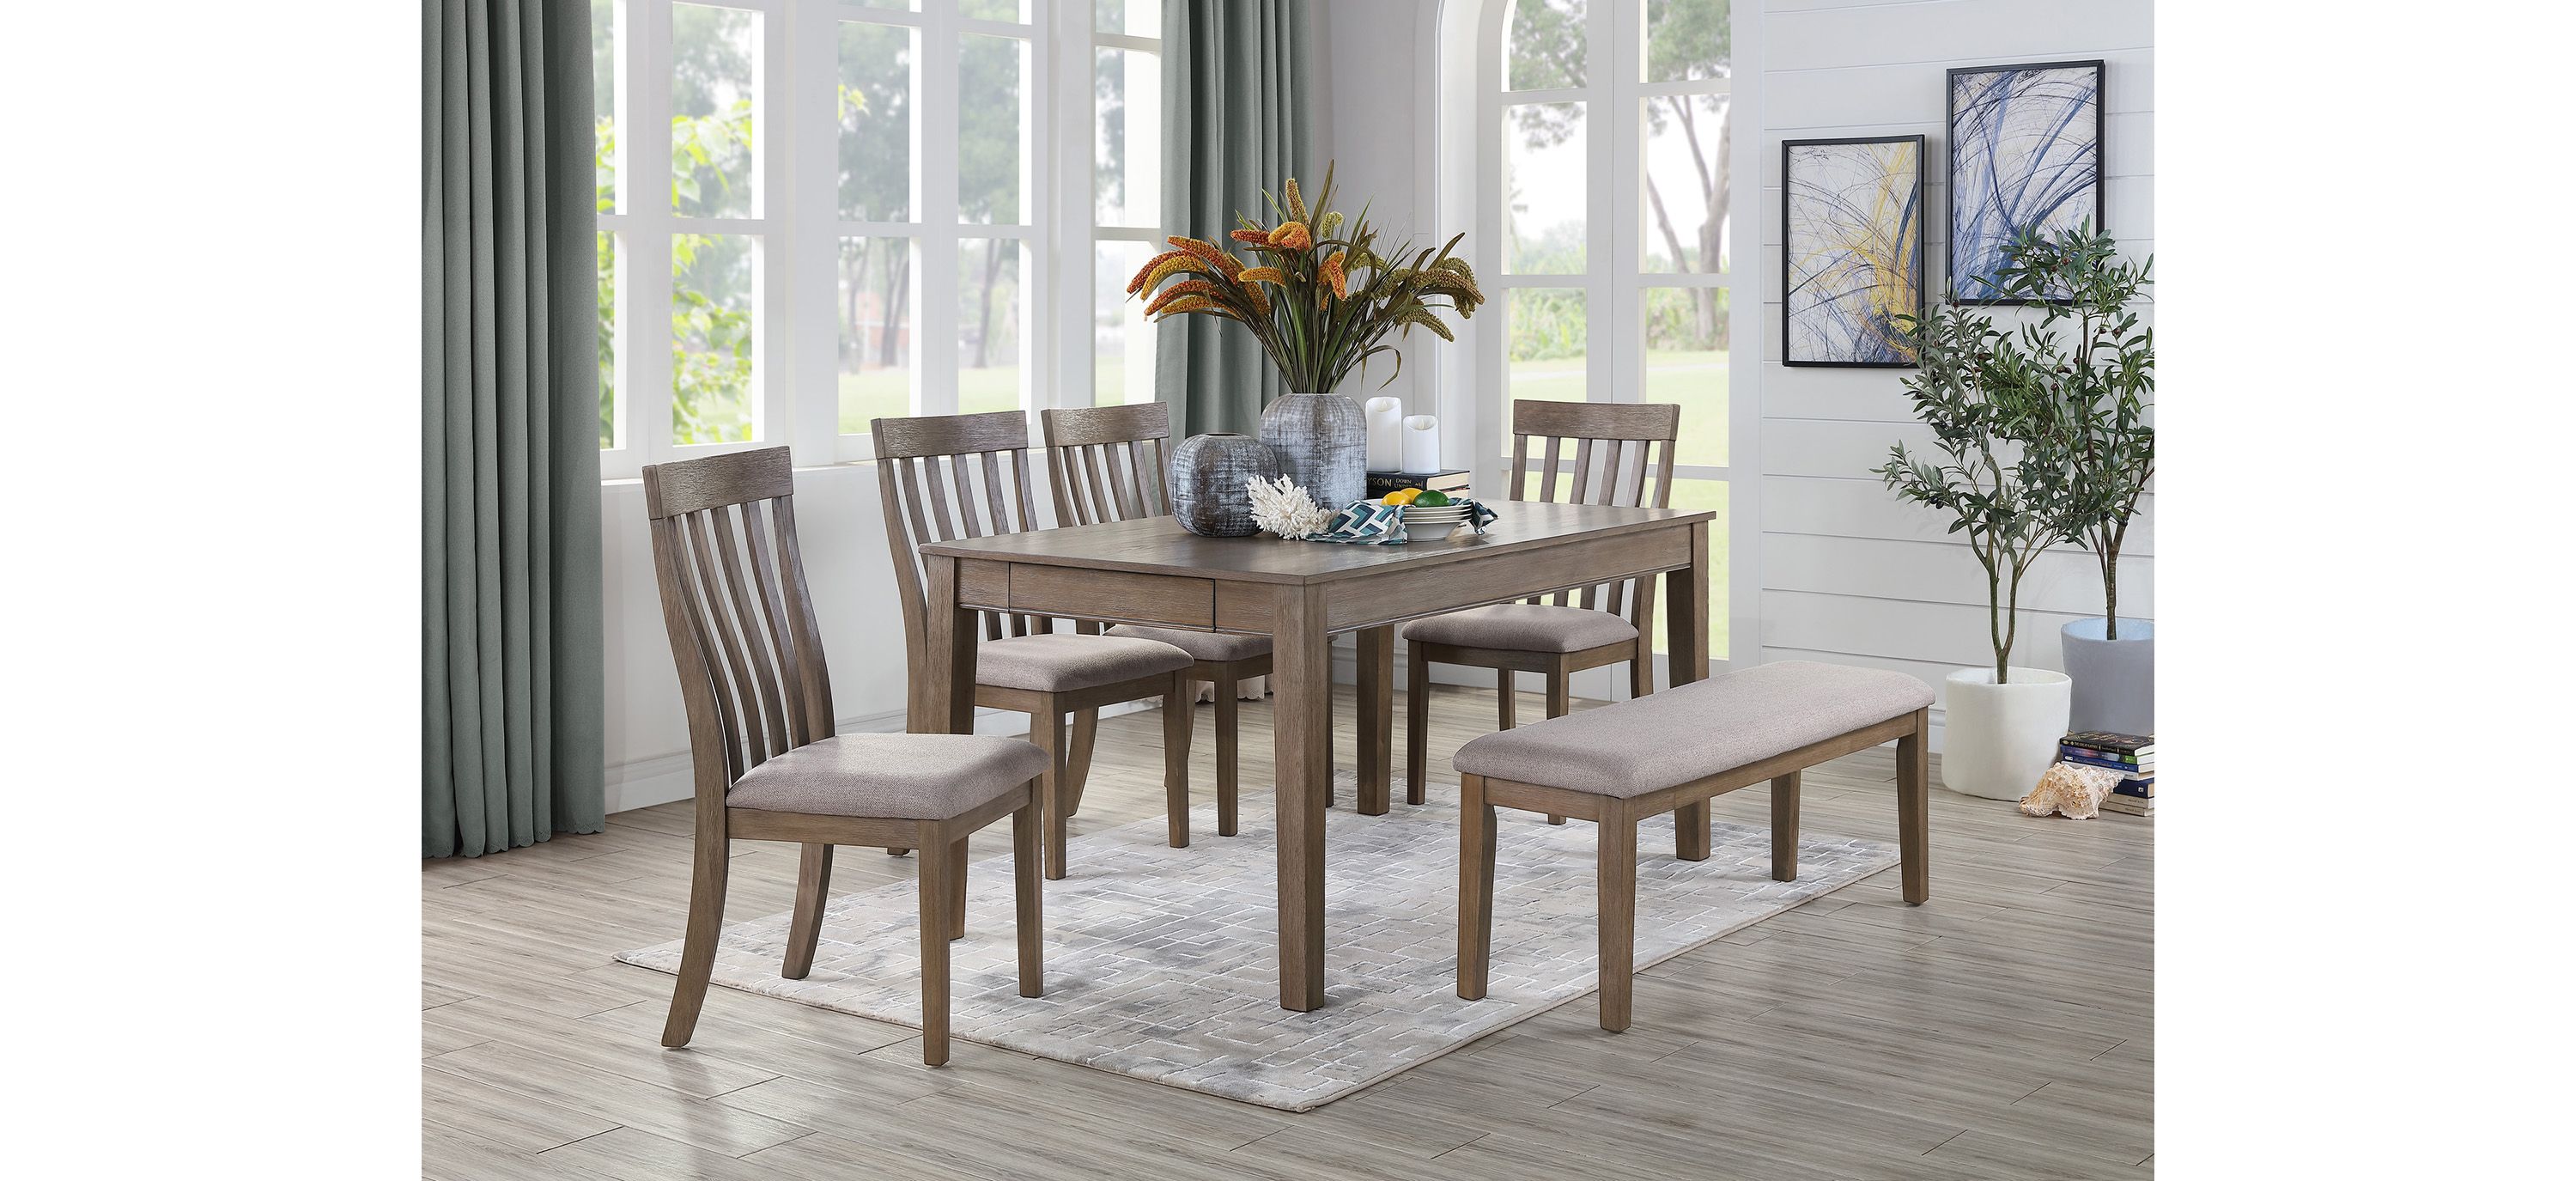 Brim 6-pc. Dining Room Set with Bench